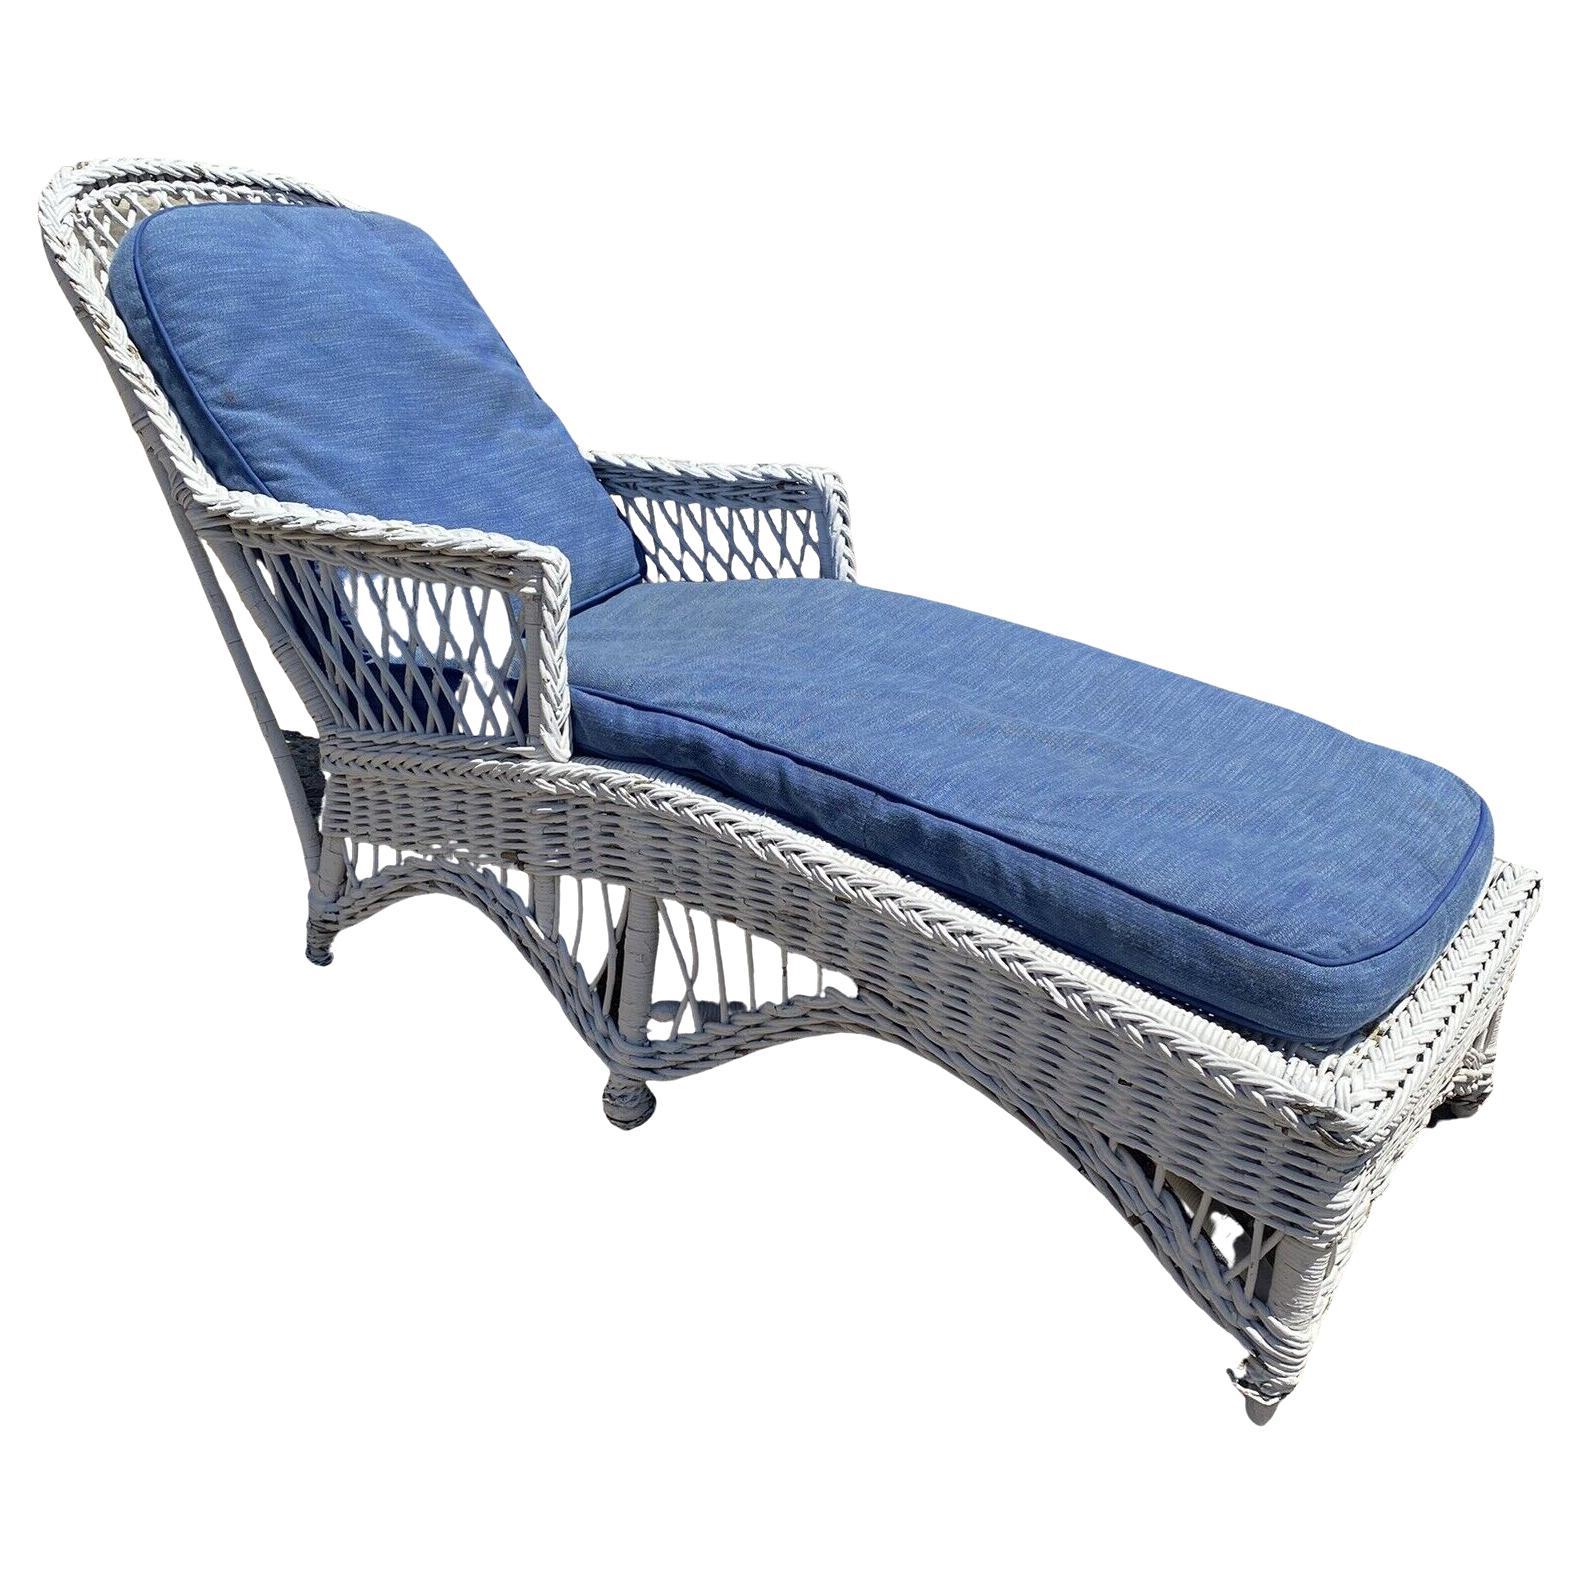 Antique American Victorian White Wicker Sunroom Chaise Lounge Arm Chair Sofa For Sale